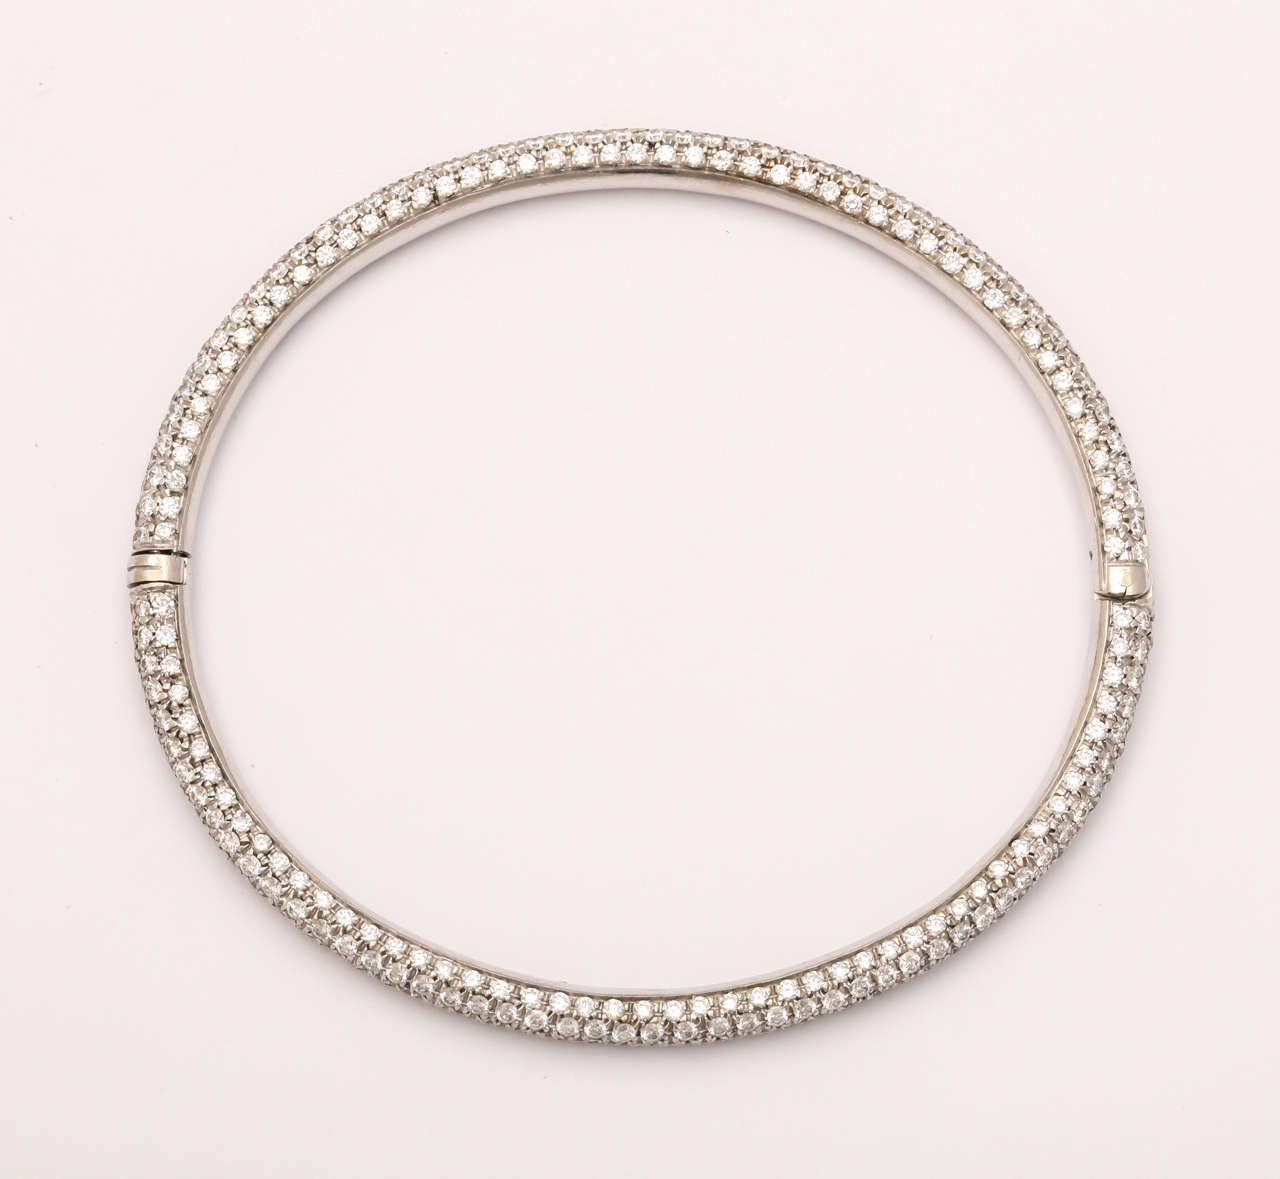 18k white gold bangle 31 grams pave set with 500 full cut diamonds approximate total weight 5.00 carats